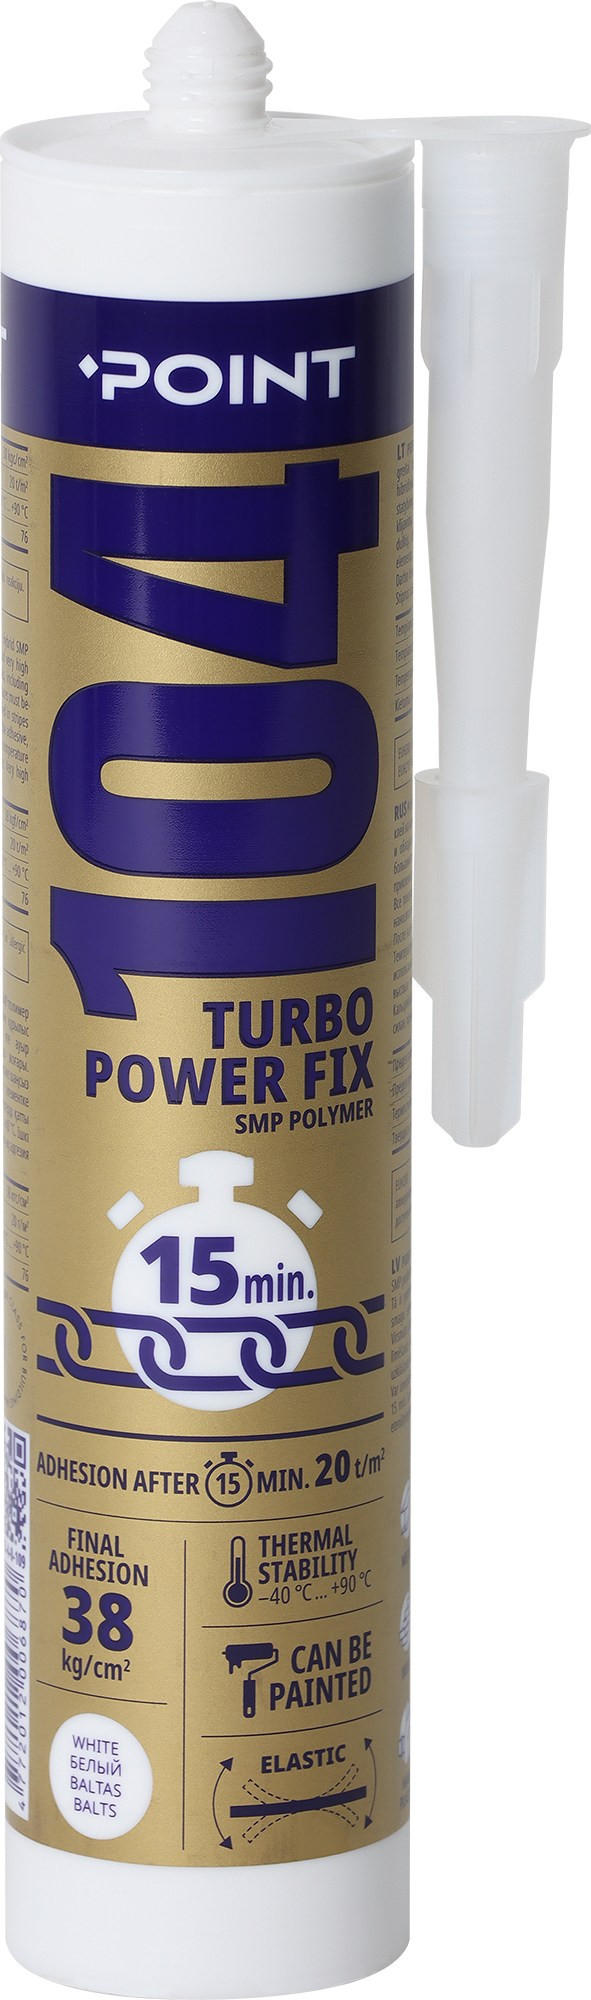 104 TURBO FAST & STRONG FIX hybrid adhesive and sealant